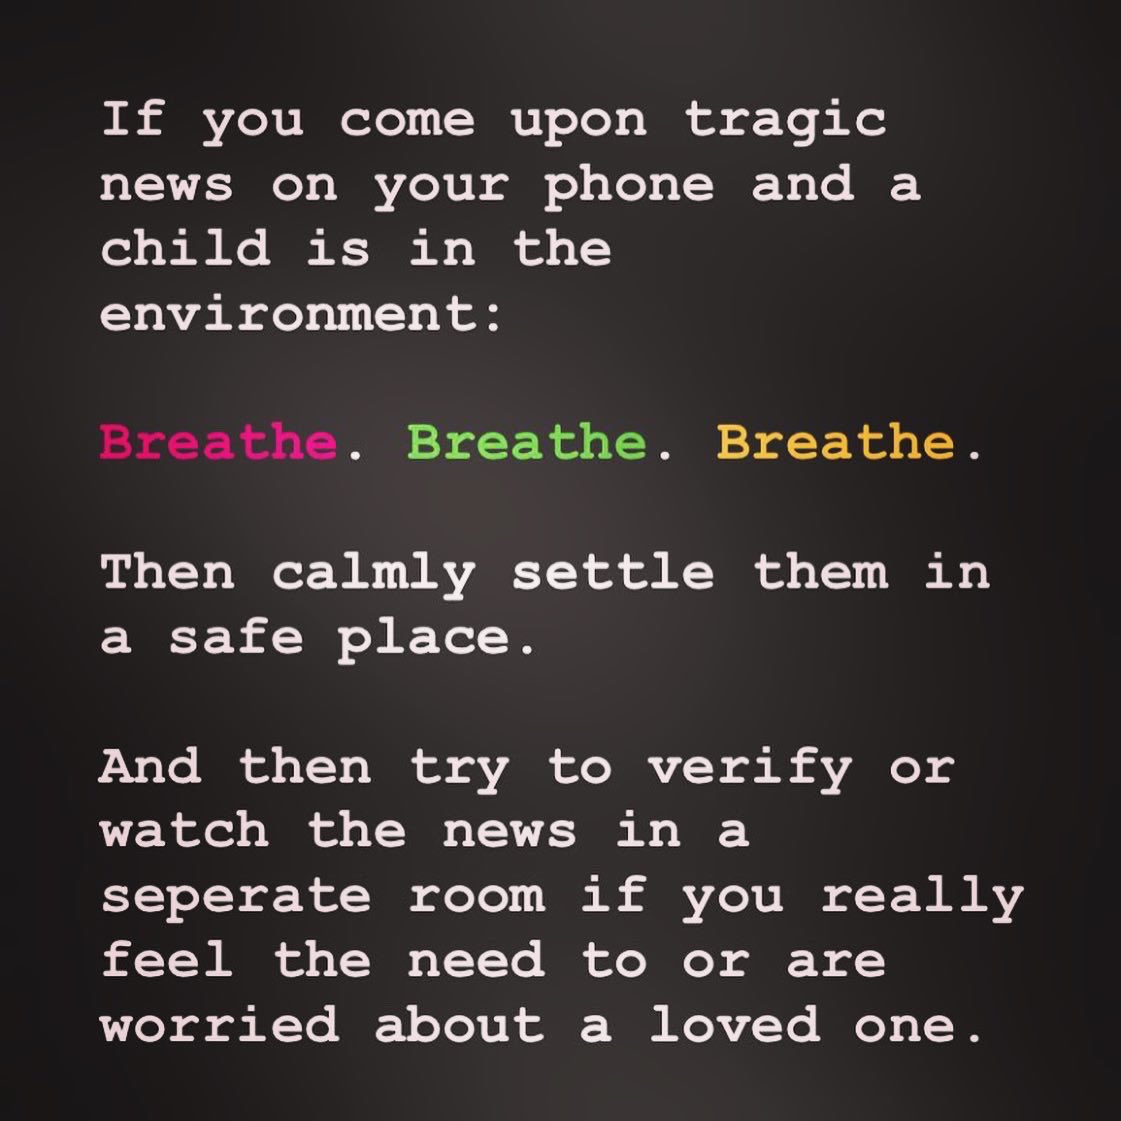 If you are parenting or caregiving a child and tragic news pops up on your phone, here are some tips. - 8